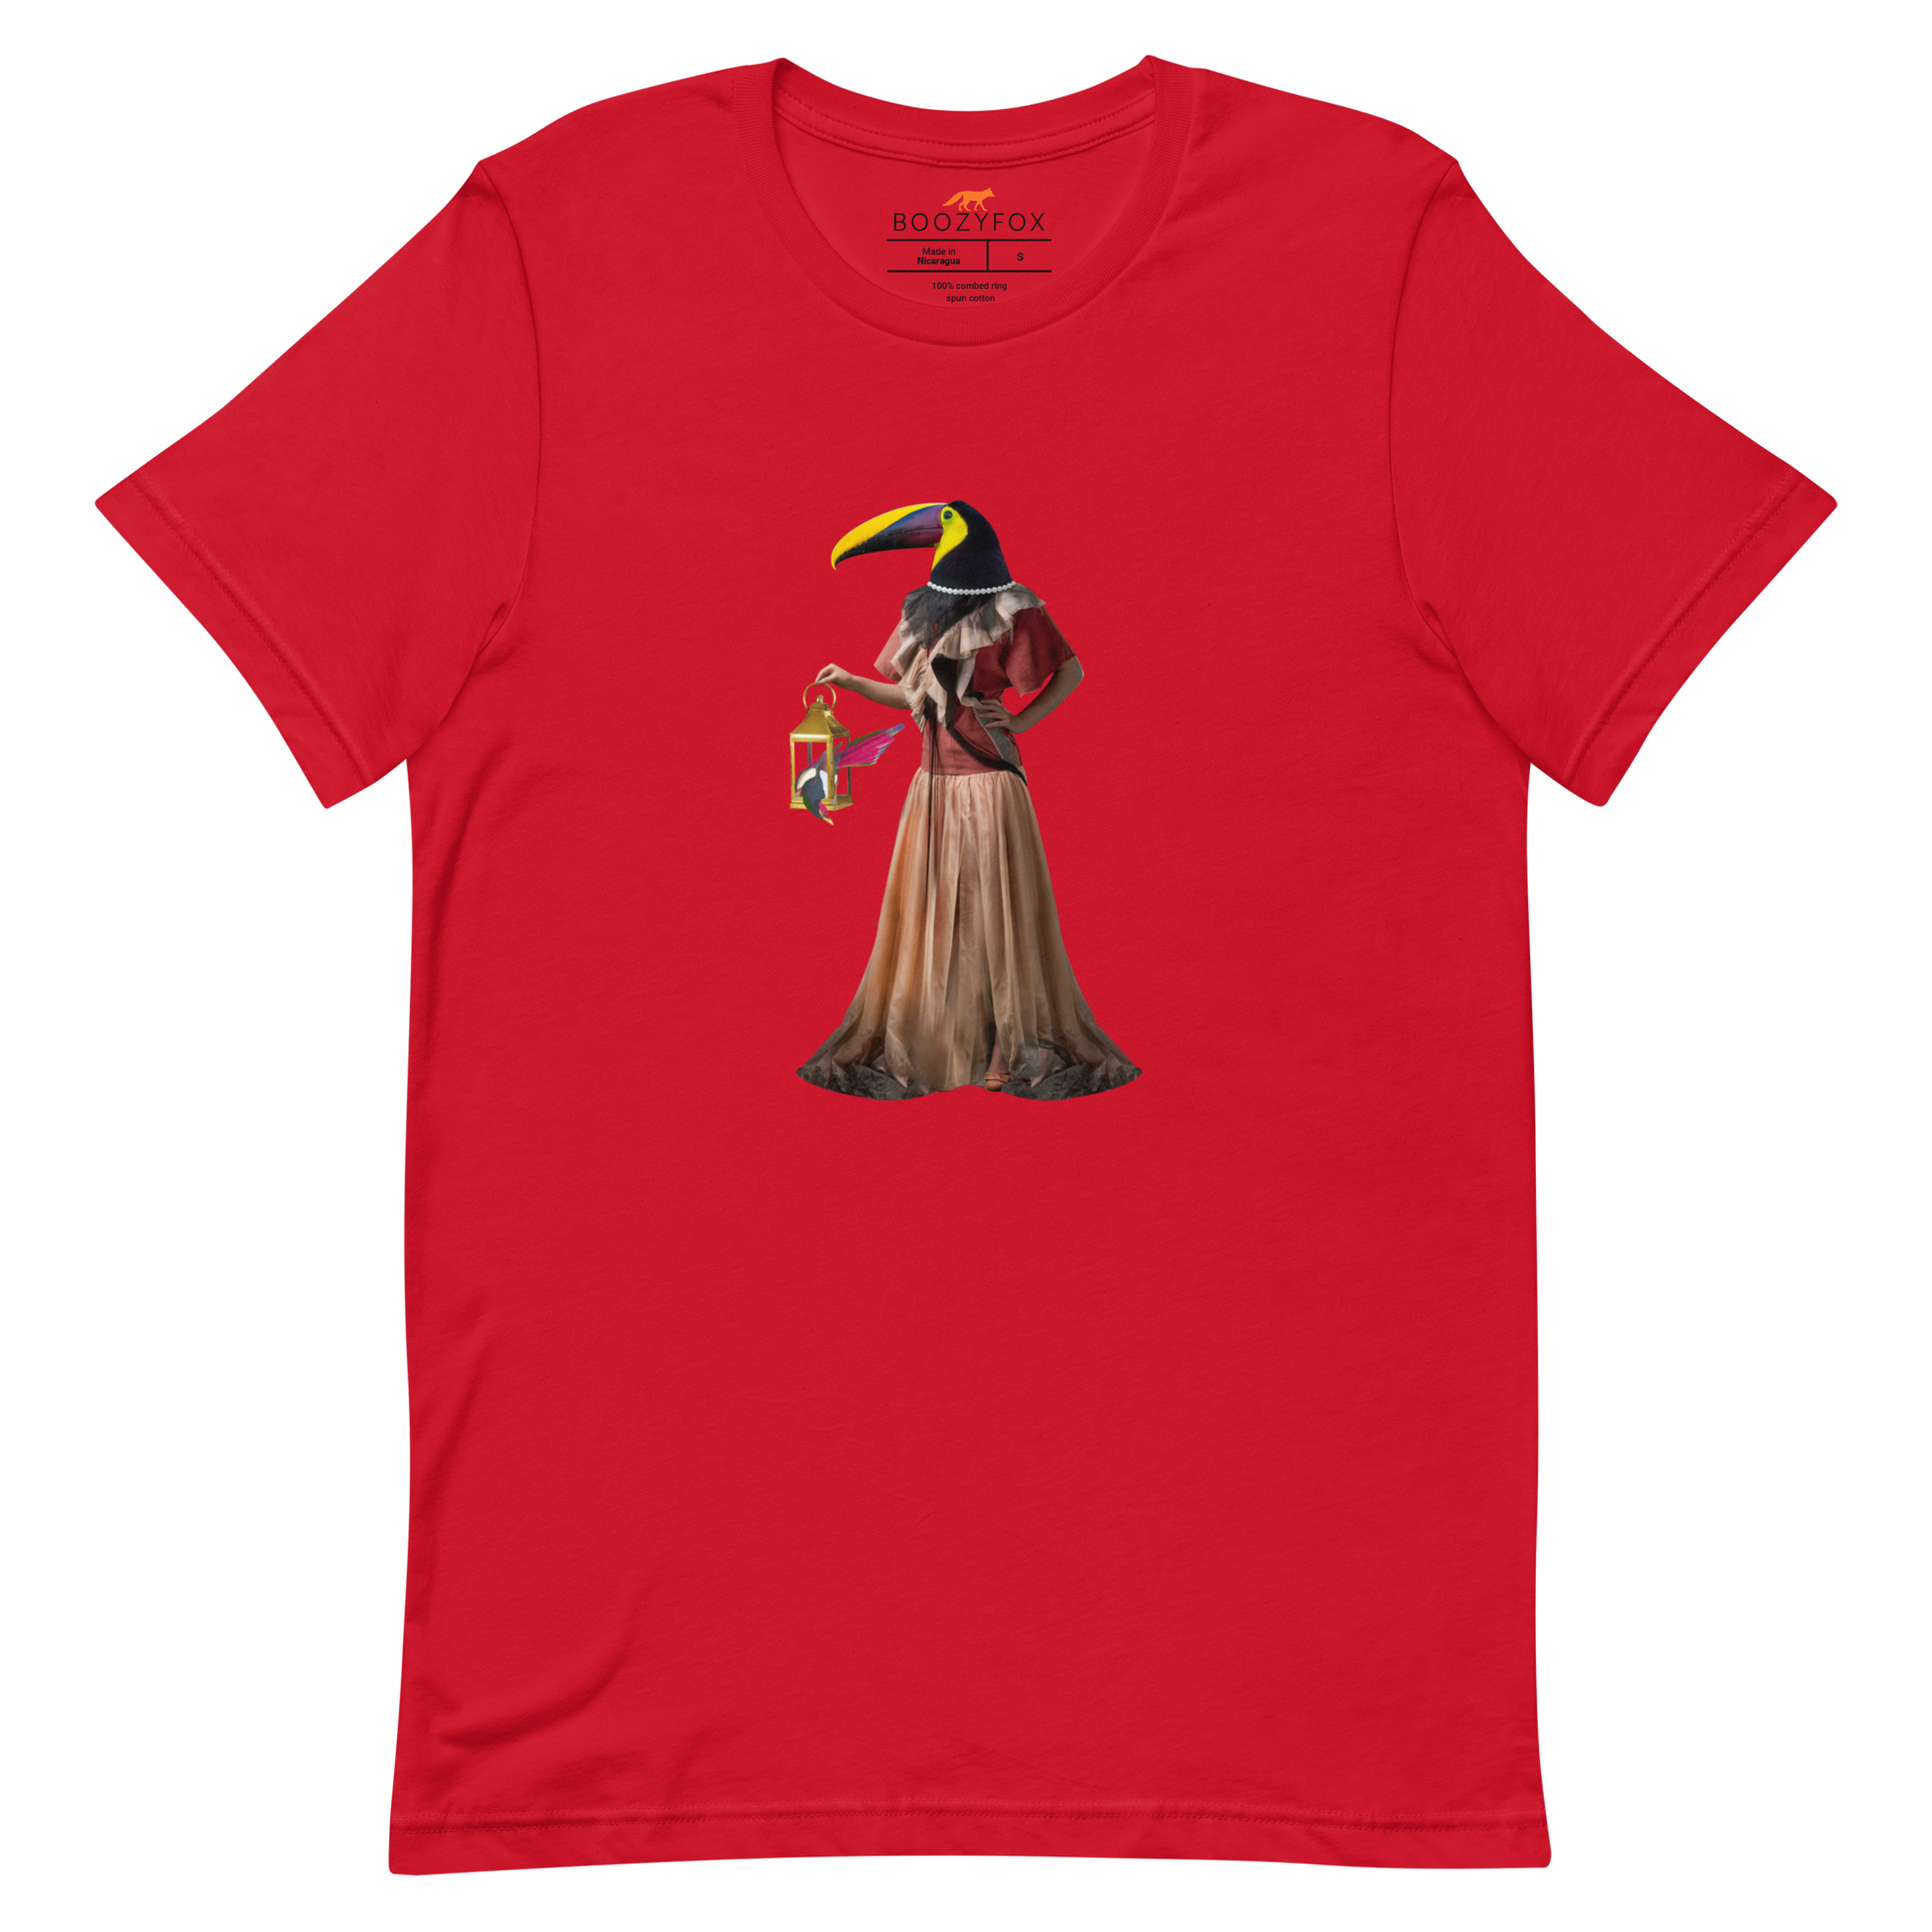 Red Premium Toucan T-Shirt featuring an Anthropomorphic Toucan graphic on the chest - Funny Graphic Toucan Tees - Boozy Fox